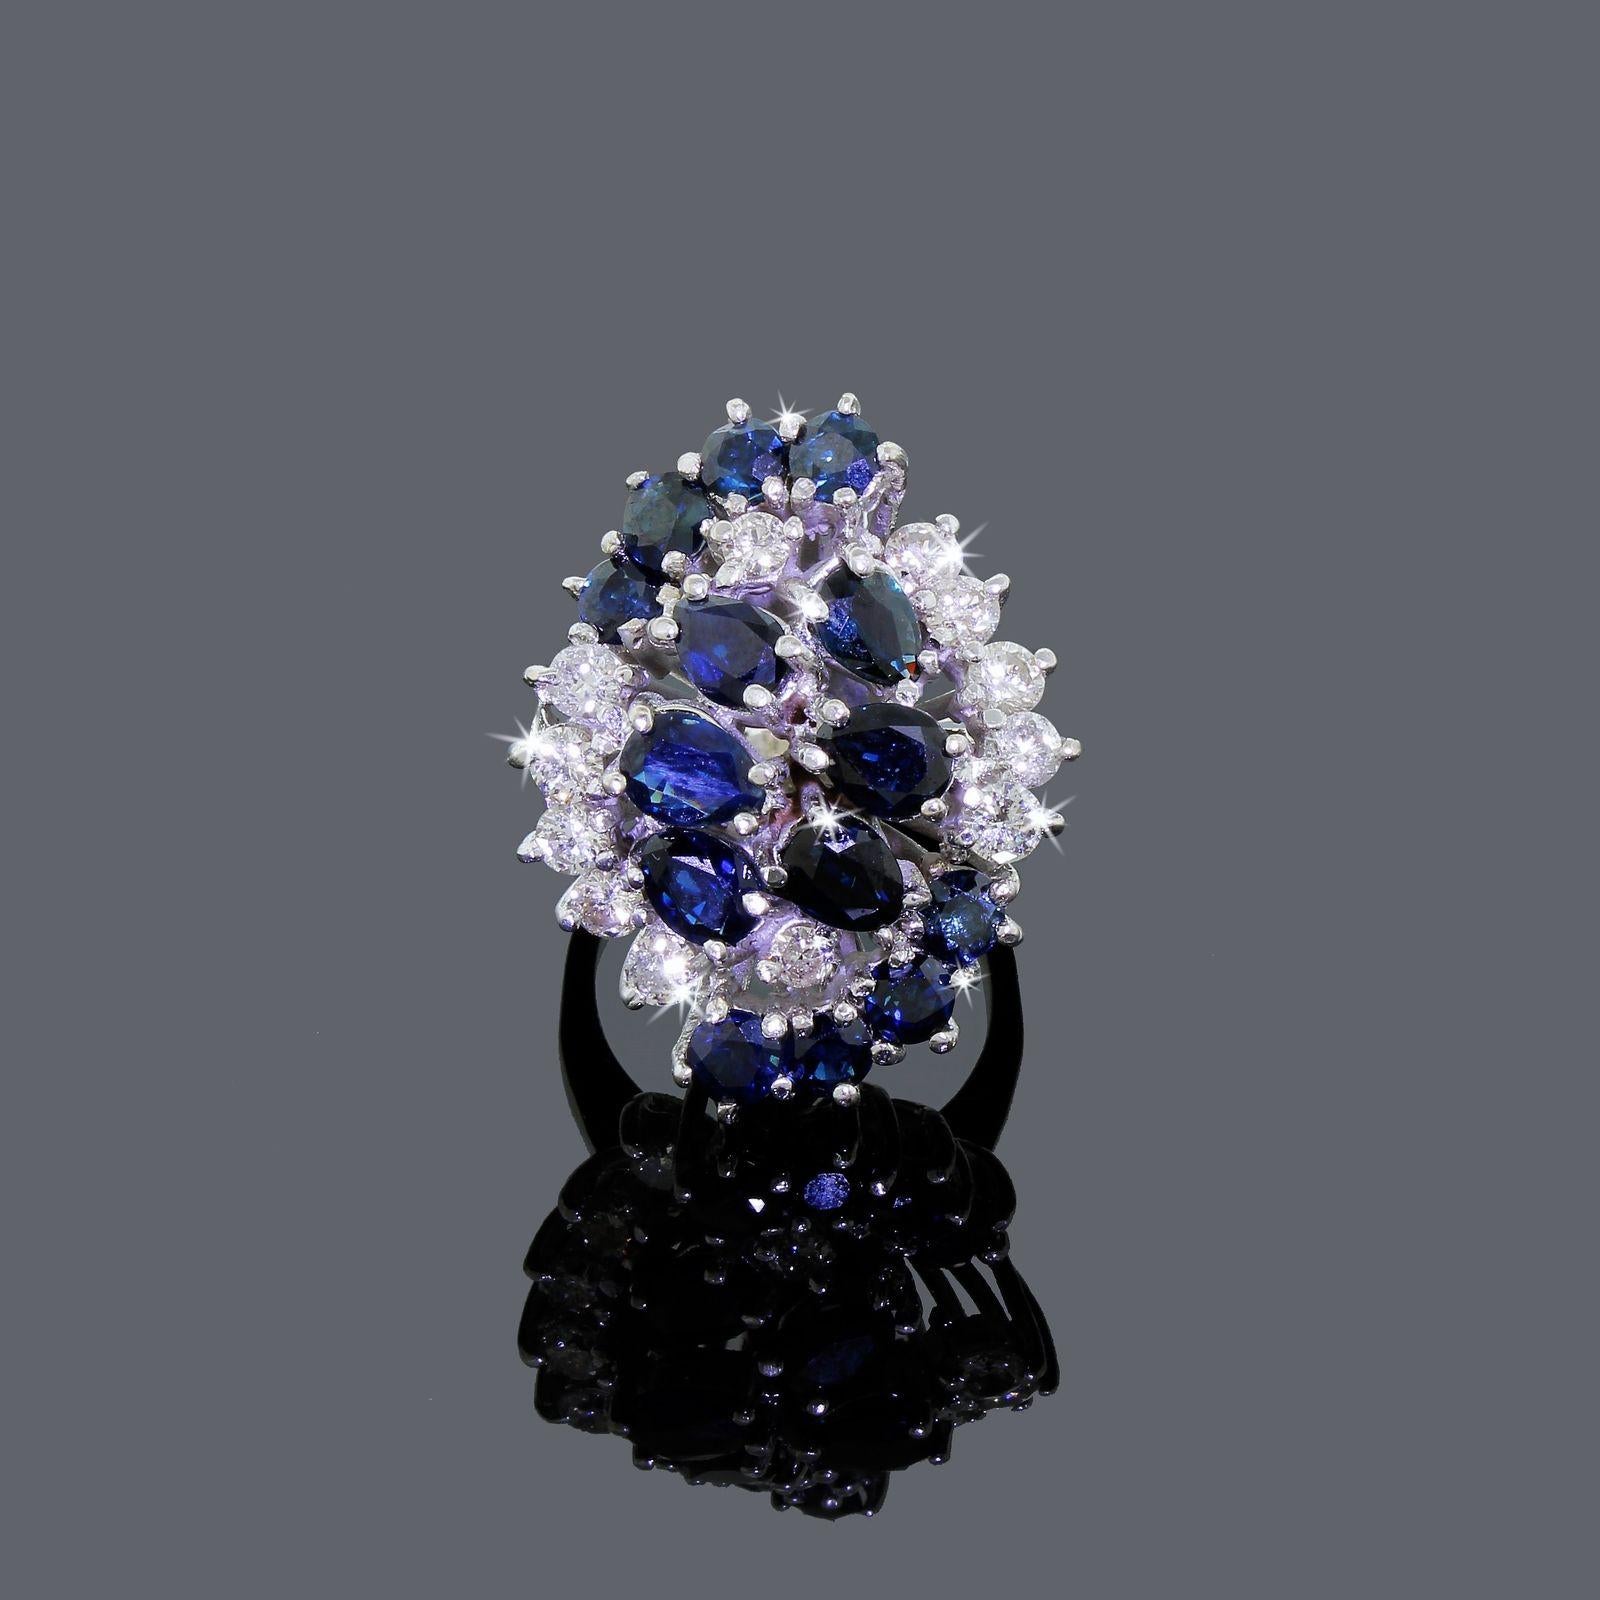 Lady's spectacular 14k white gold Diamond & Sapphire cocktail cluster ring set, custom made and truly spectacular not to mention eye catching.
All the stones sit elevated on a basket style cage, they are almost half an inch from the finger when worn